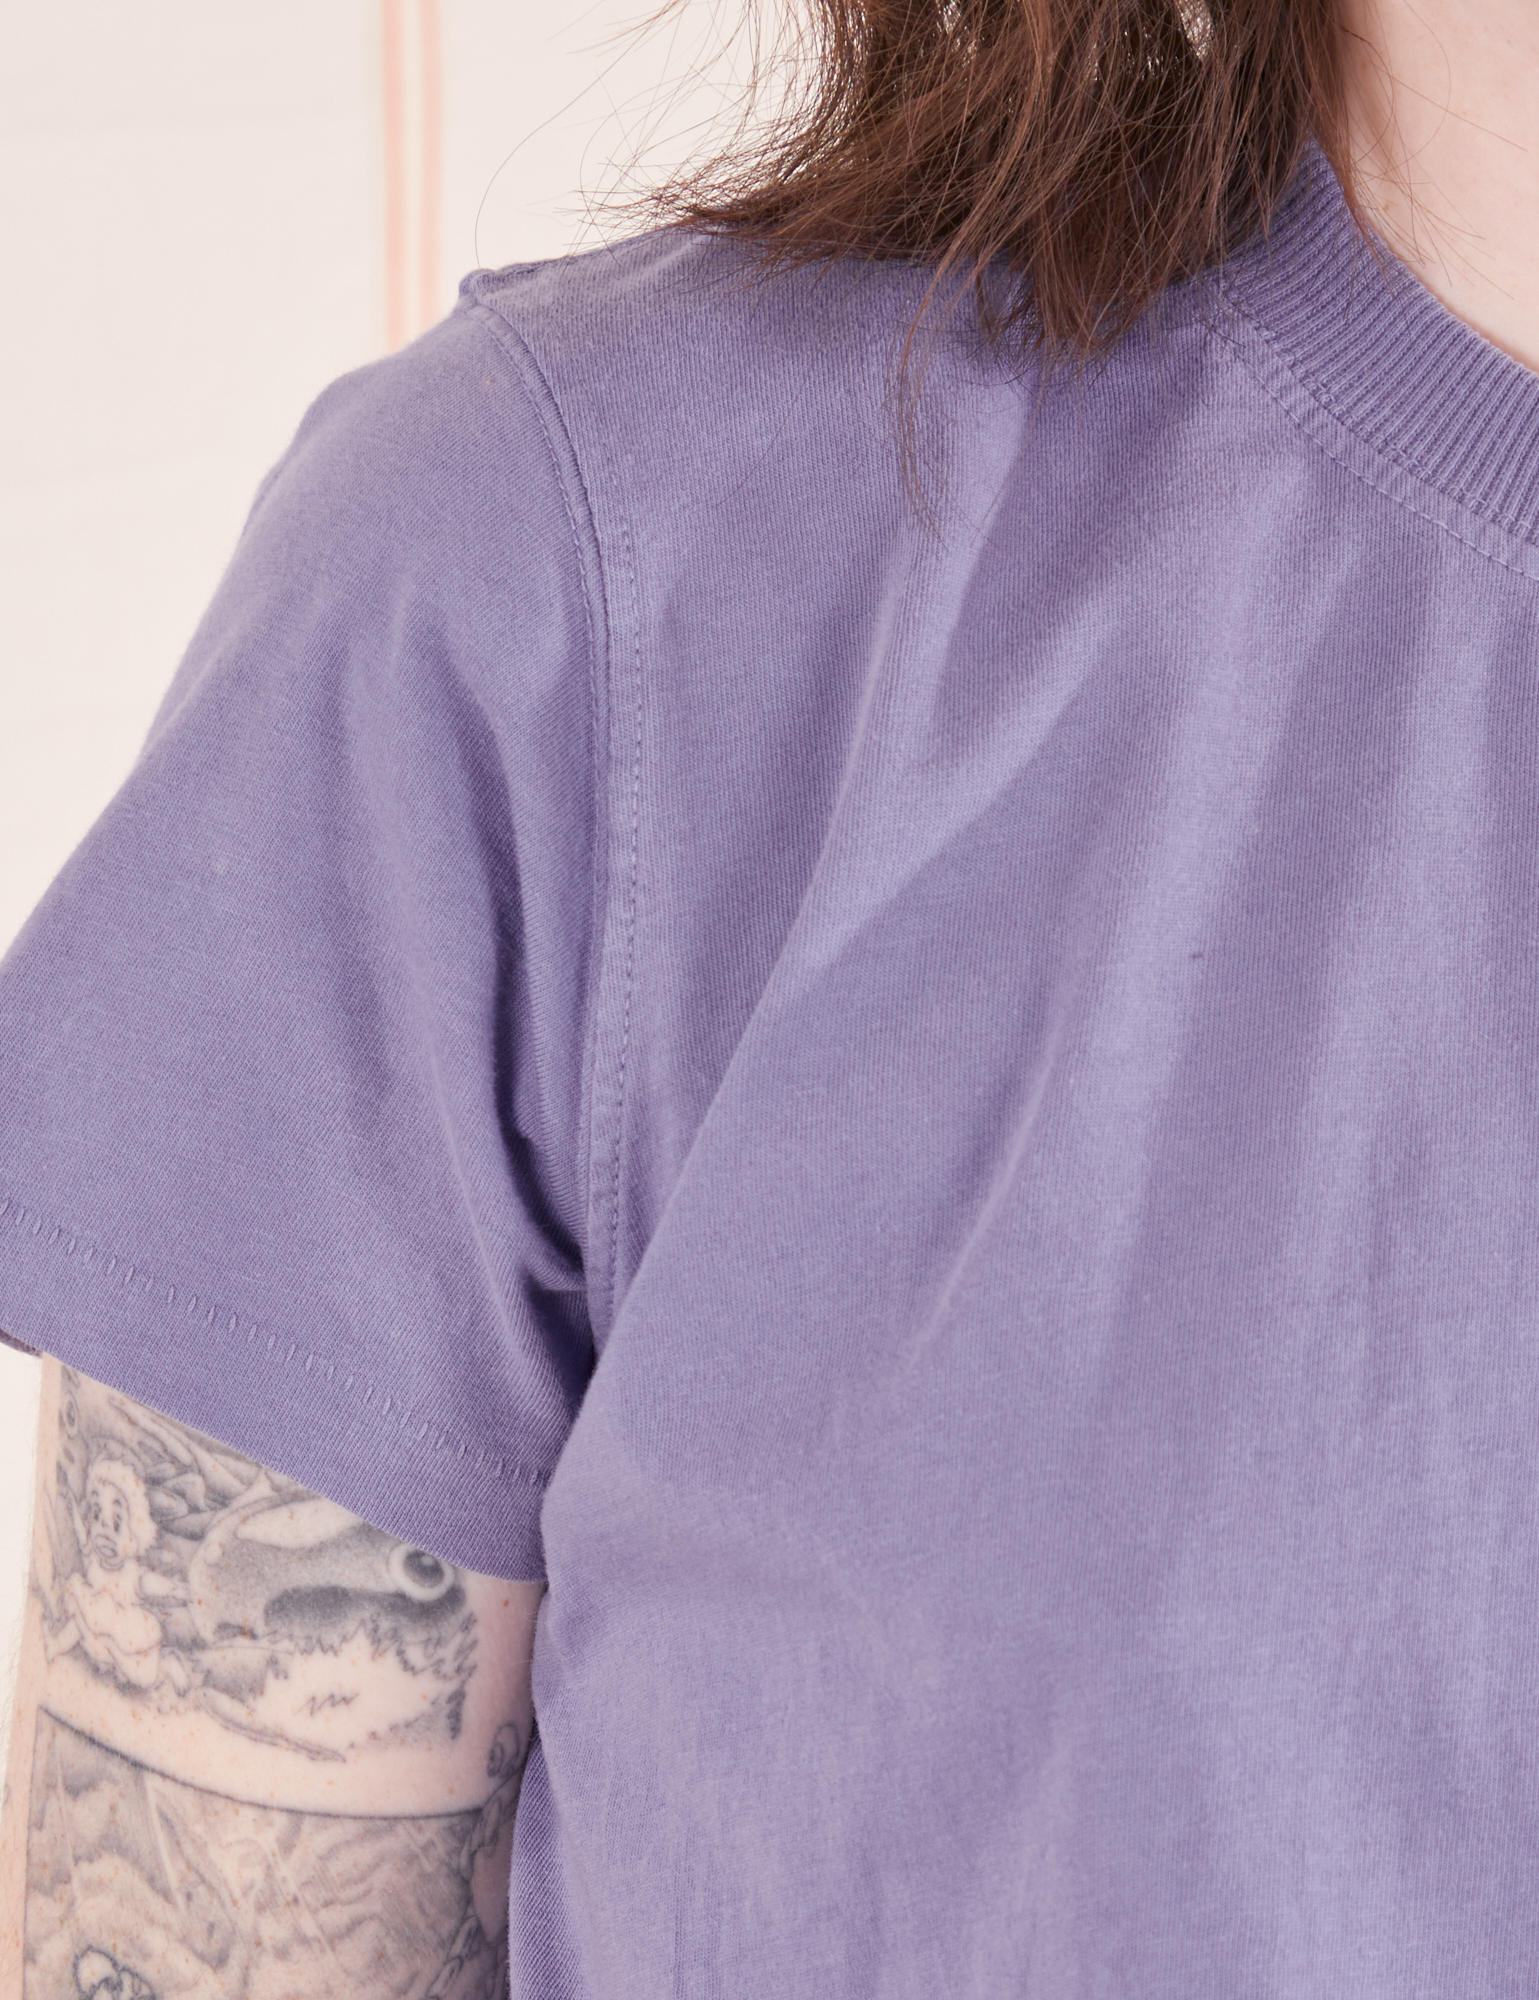 The Organic Vintage Tee in Faded Grape close up on Hana